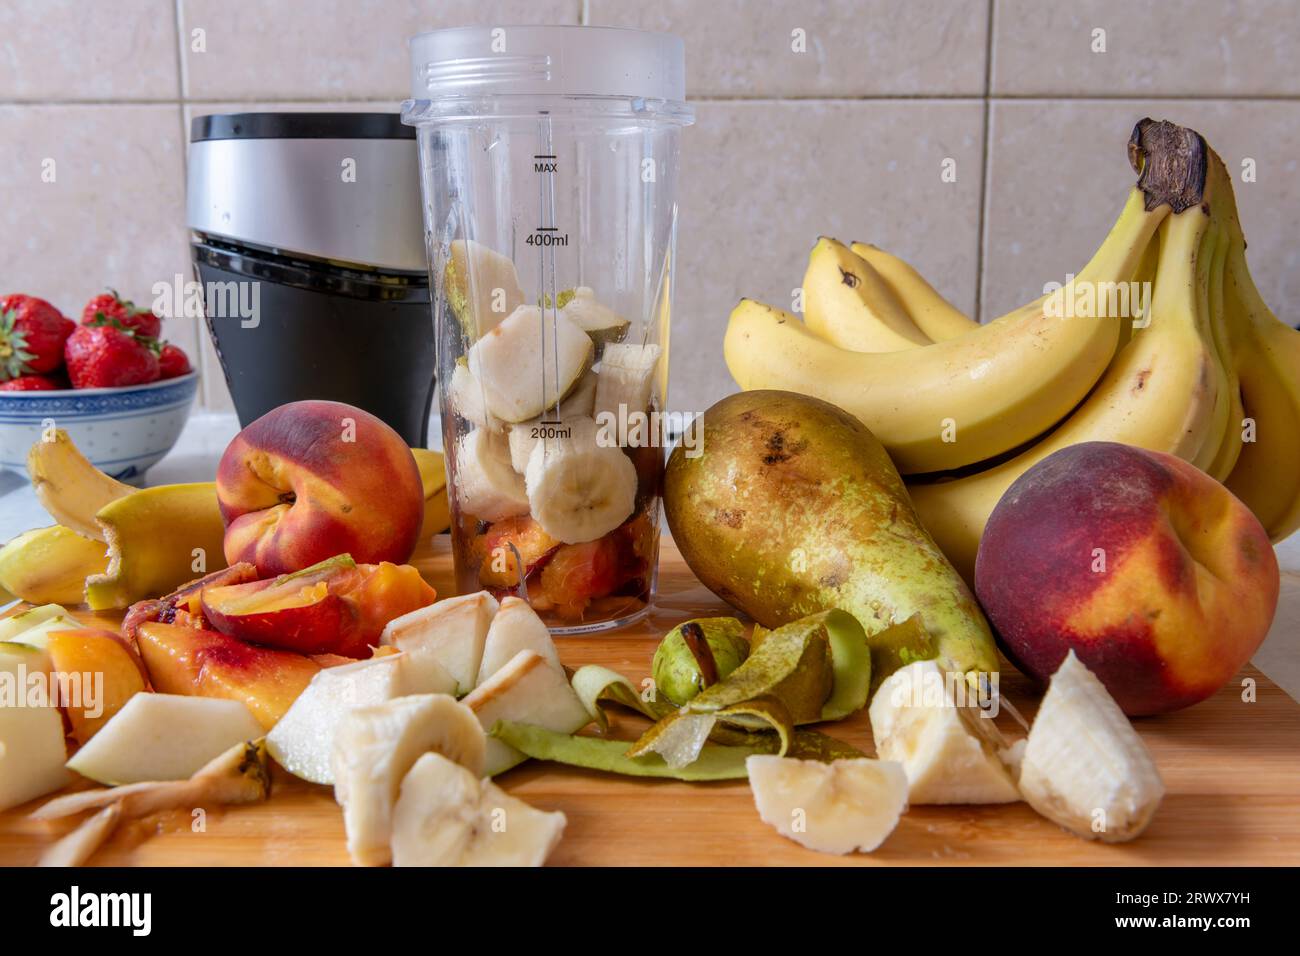 Making a smoothie with fresh fruits in a blender. Healthy life style, health food concept. Stock Photo